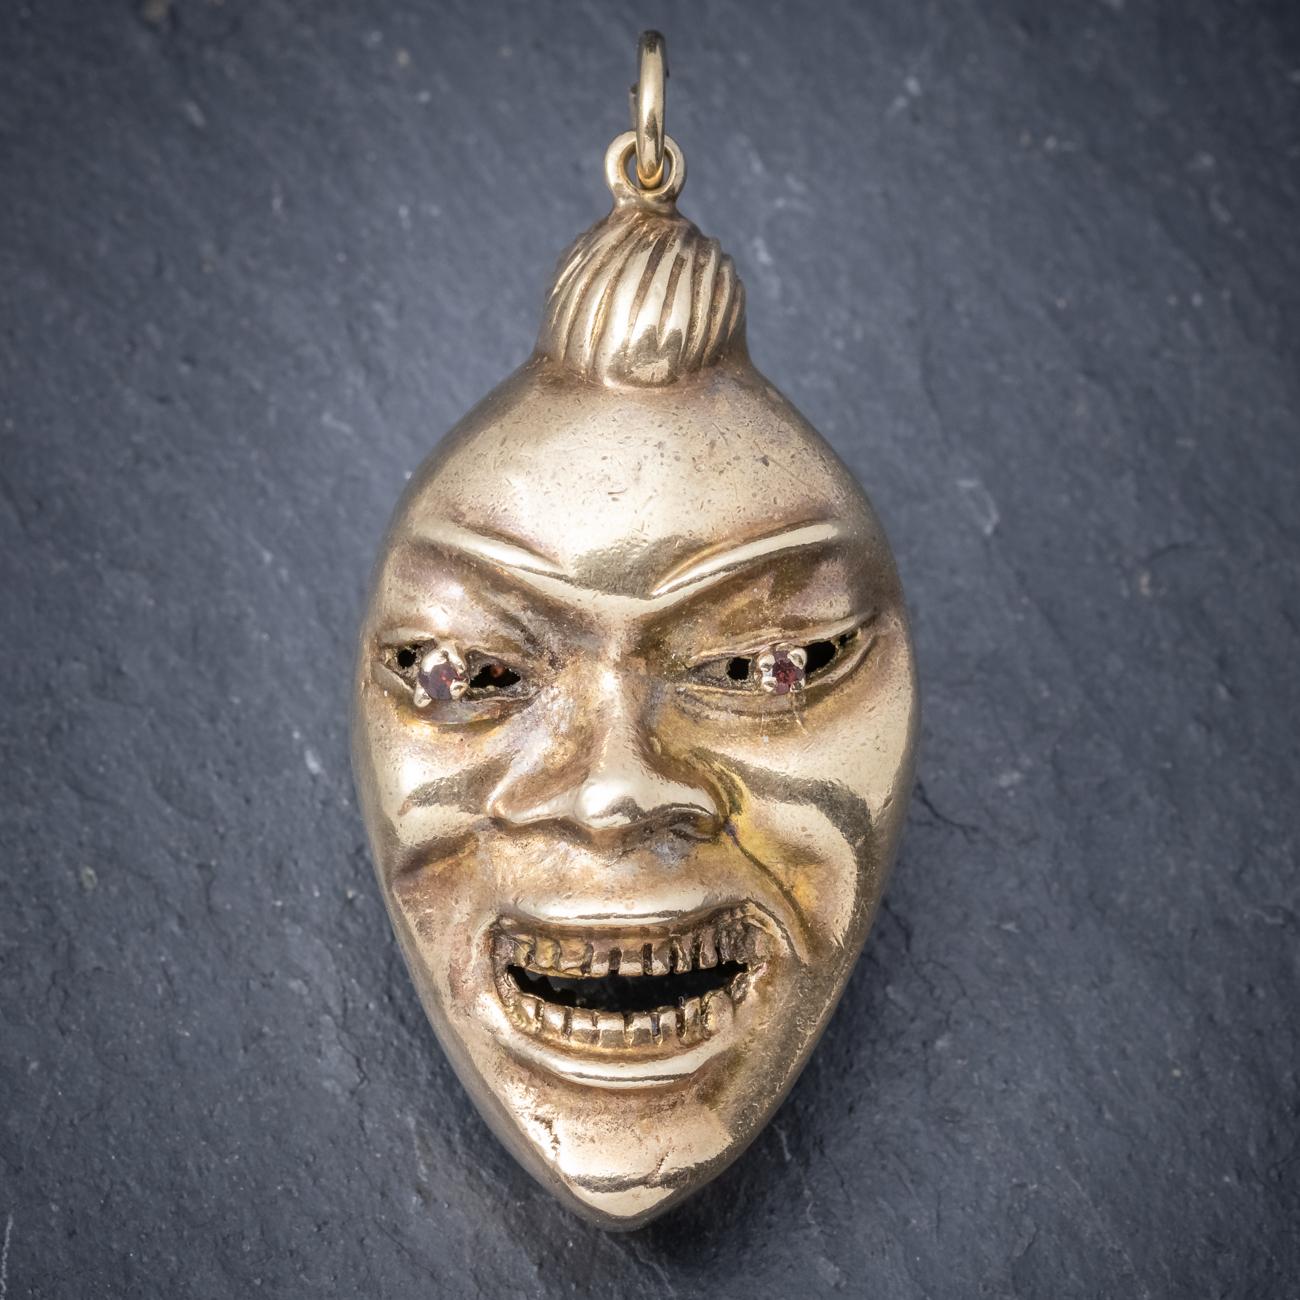 A curious antique Victorian pendant featuring two engraved faces on the back and front set with red Garnet eyes. The faces are full of character and appear to be laughing with wide grins on their faces. Set in 9ct Yellow Gold and complete with